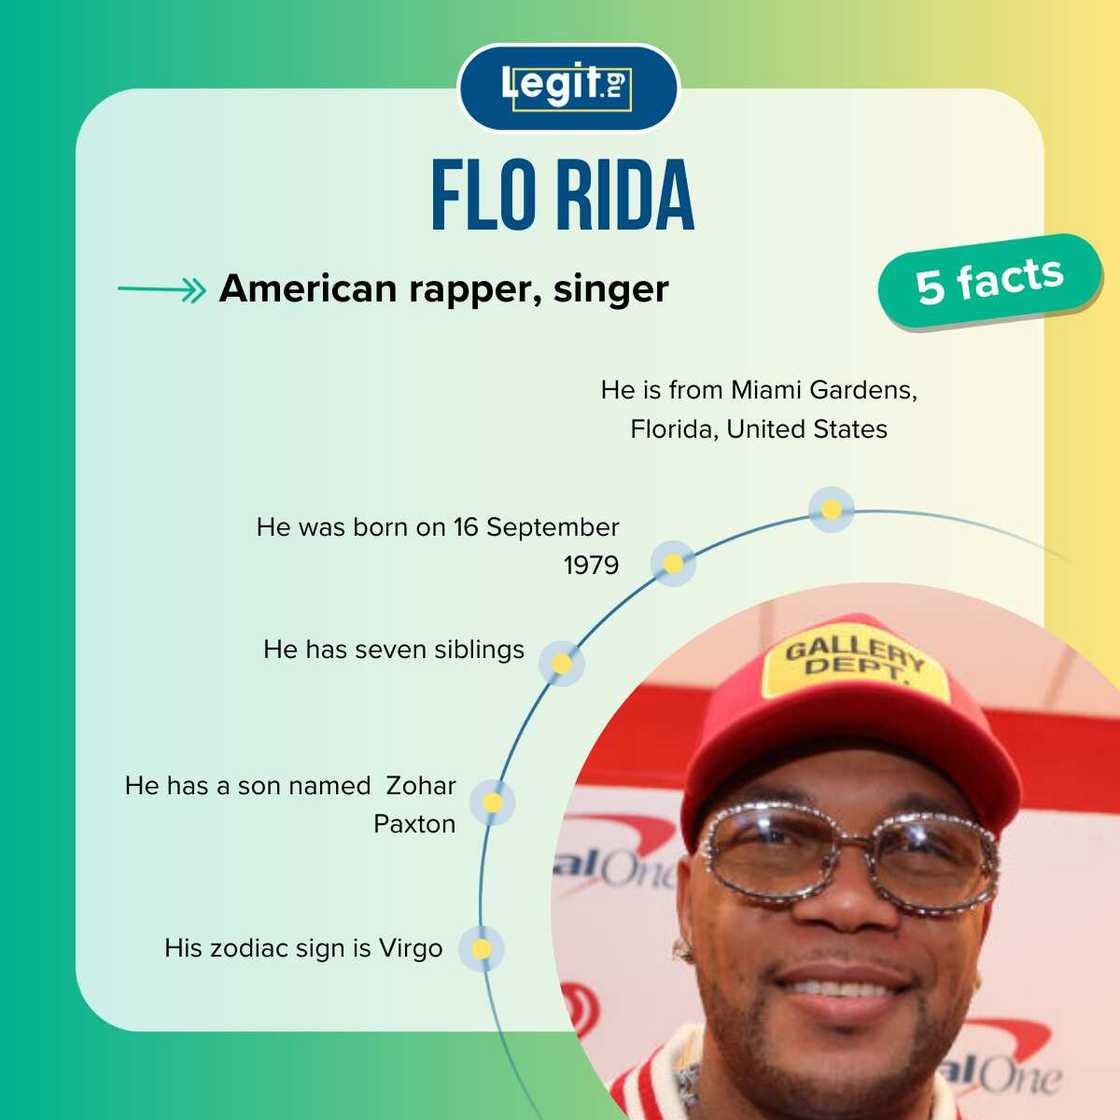 Facts about Flo Rida